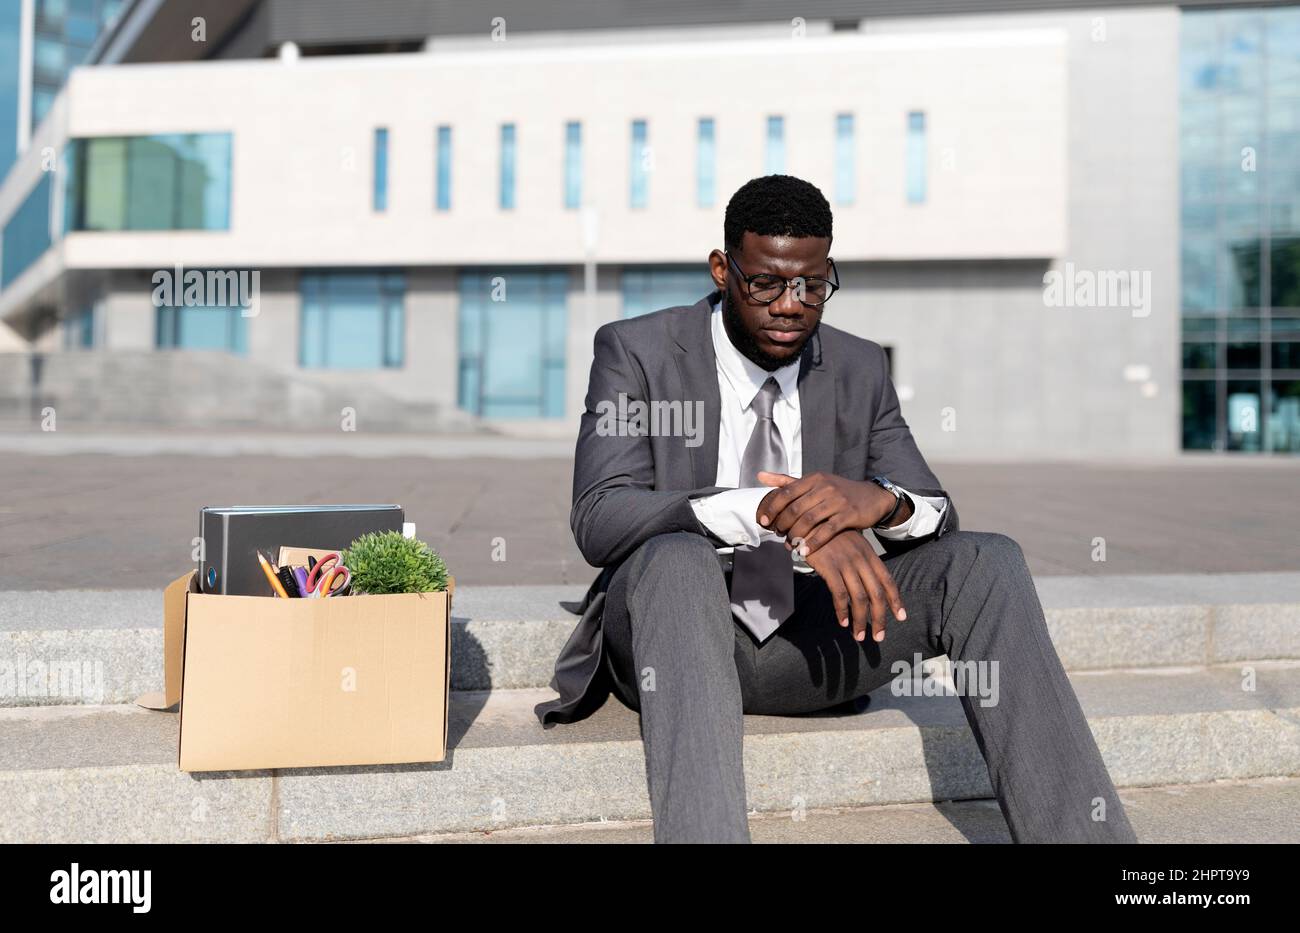 Crisis and unemployment concept. Upset black office worker sitting with box of personal stuff on stairs of office center Stock Photo